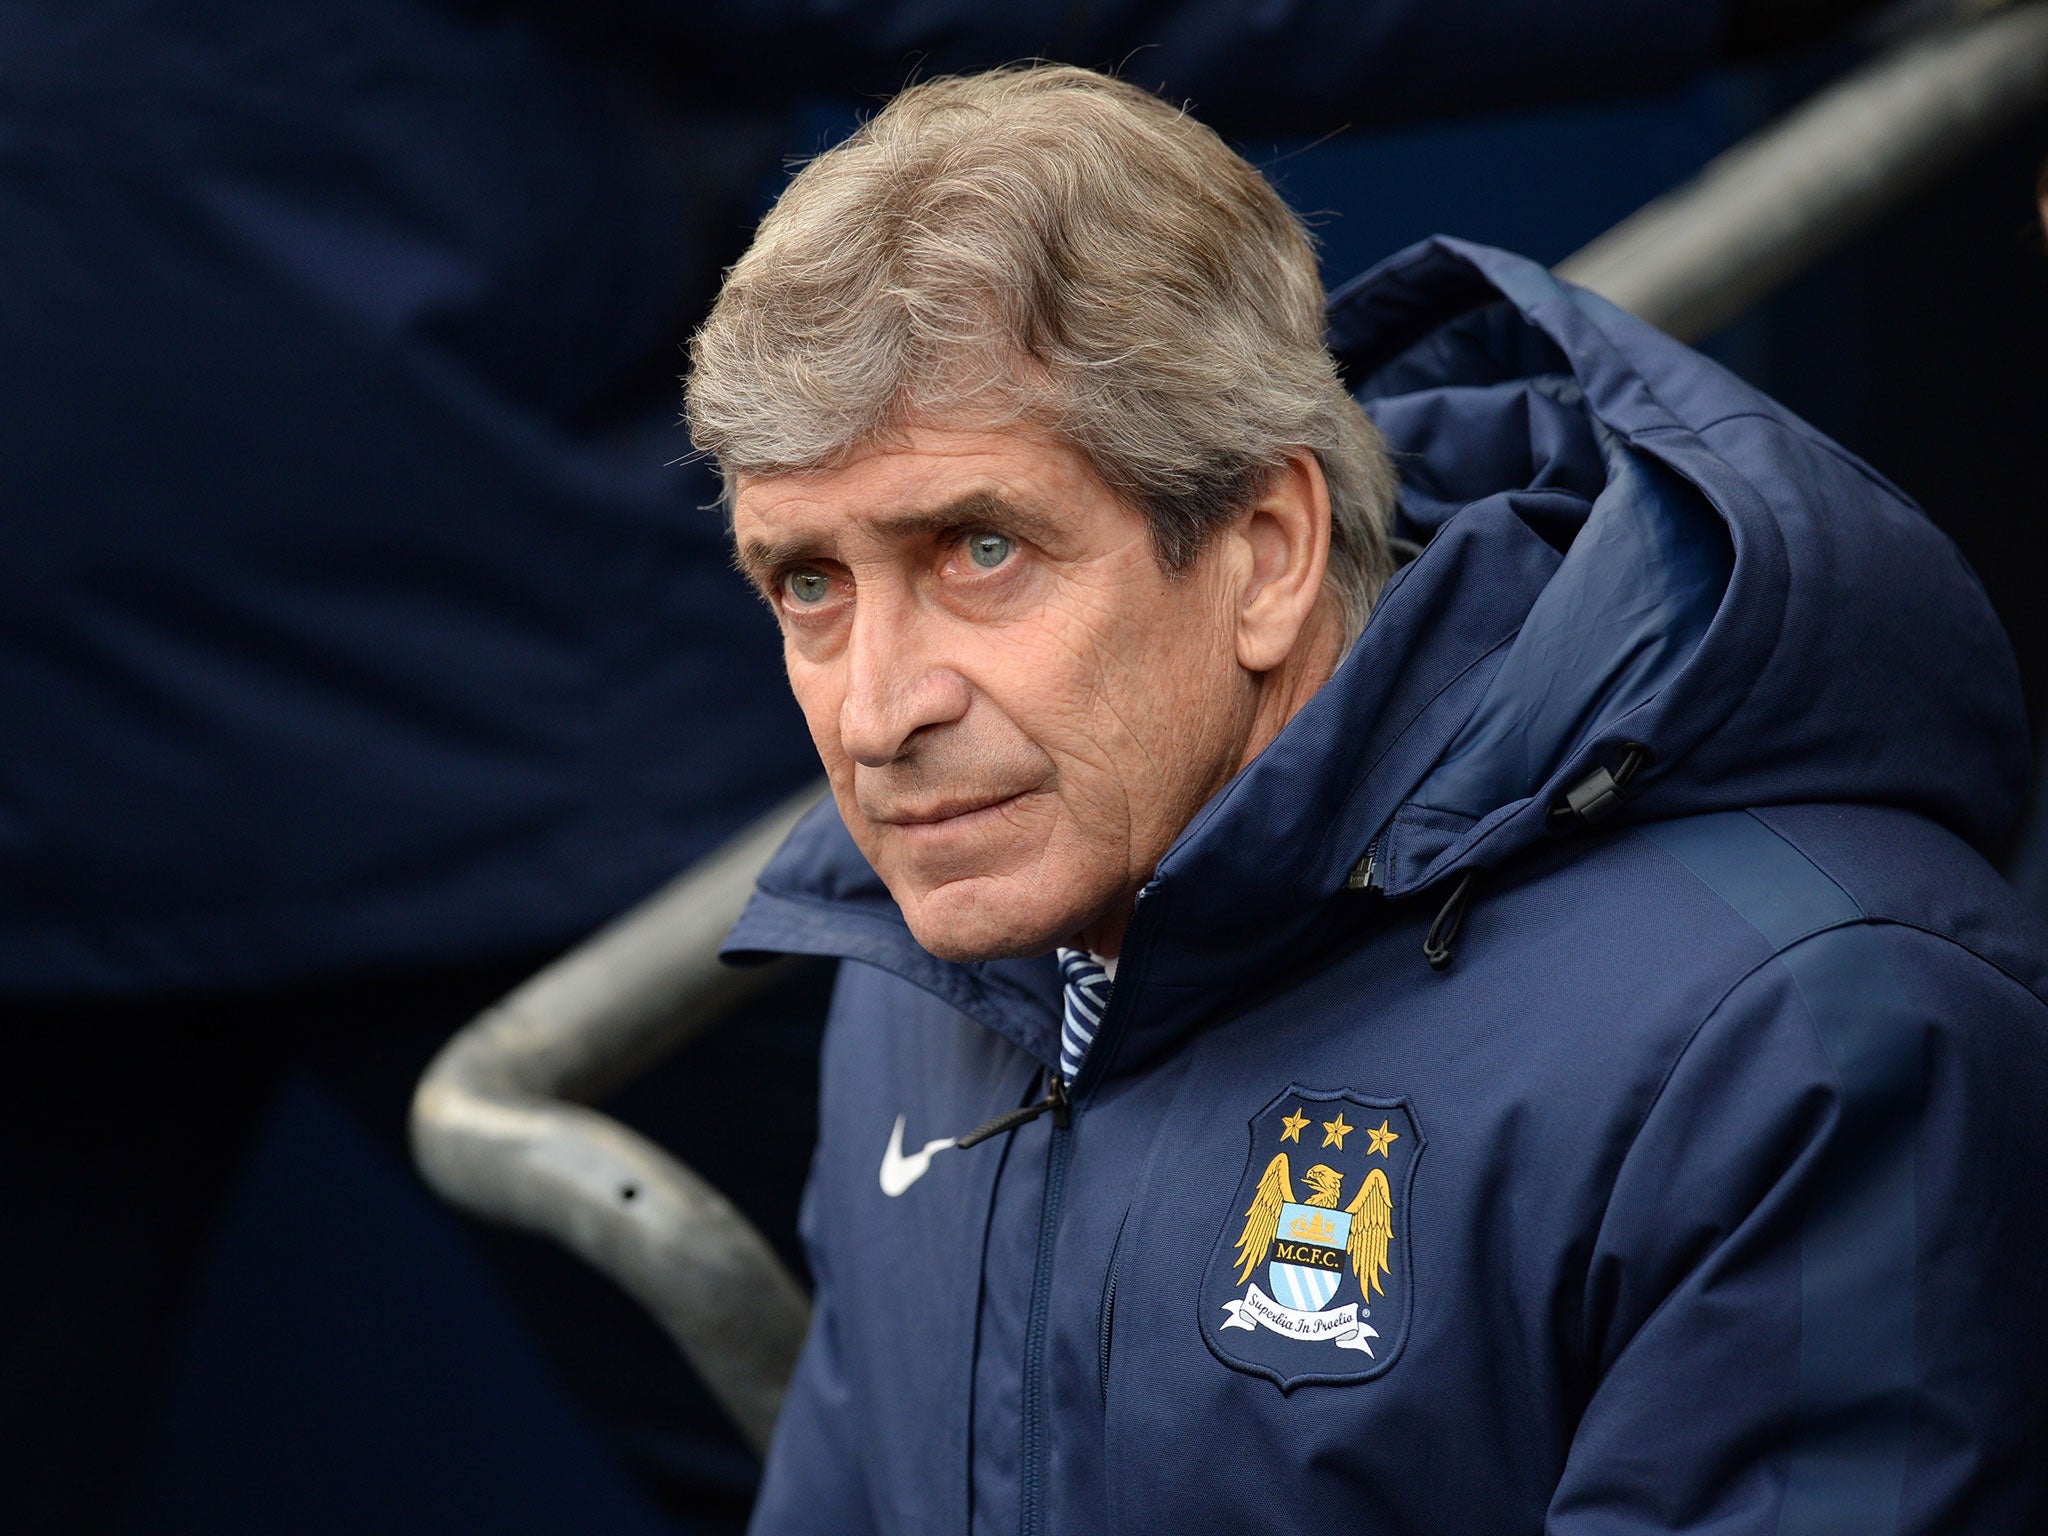 Manuel Pellegrini is under pressure to succeed at Manchester City